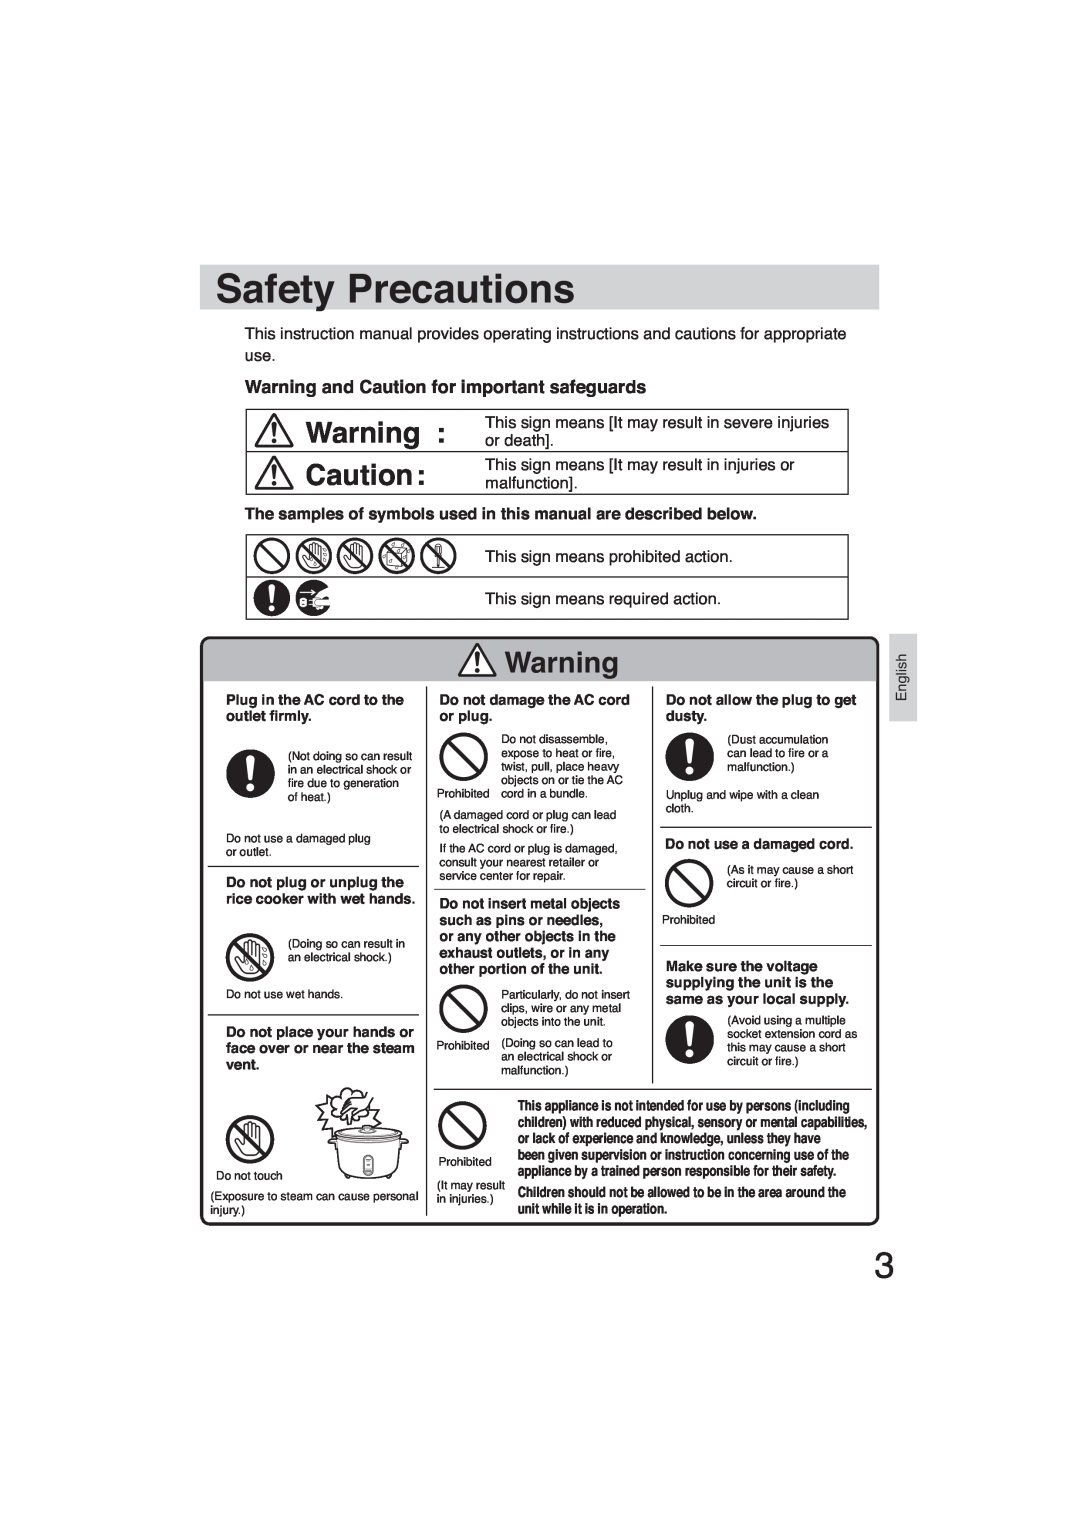 Panasonic SR-GA721 Safety Precautions, Warning and Caution for important safeguards, Do not damage the AC cord or plug 